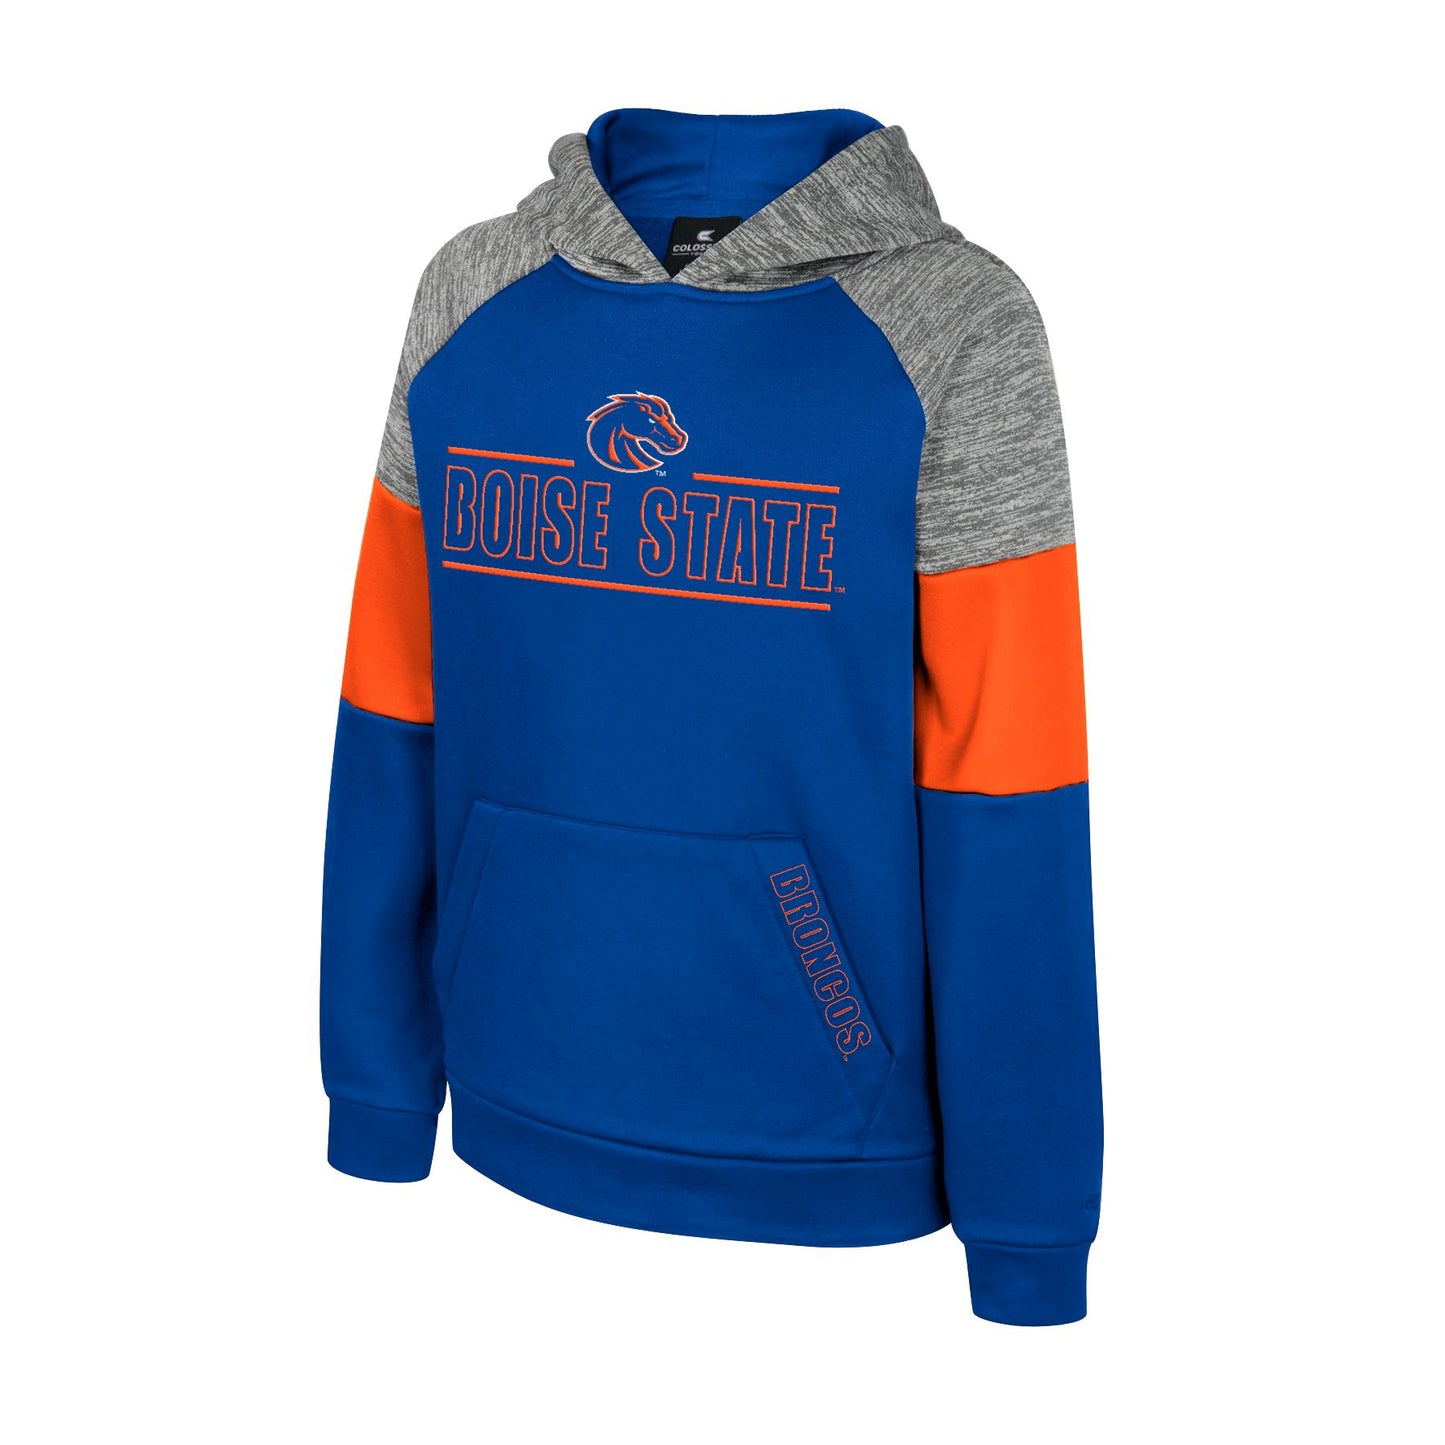 Boise State Broncos Youth Colosseum Hoodie (Blue)